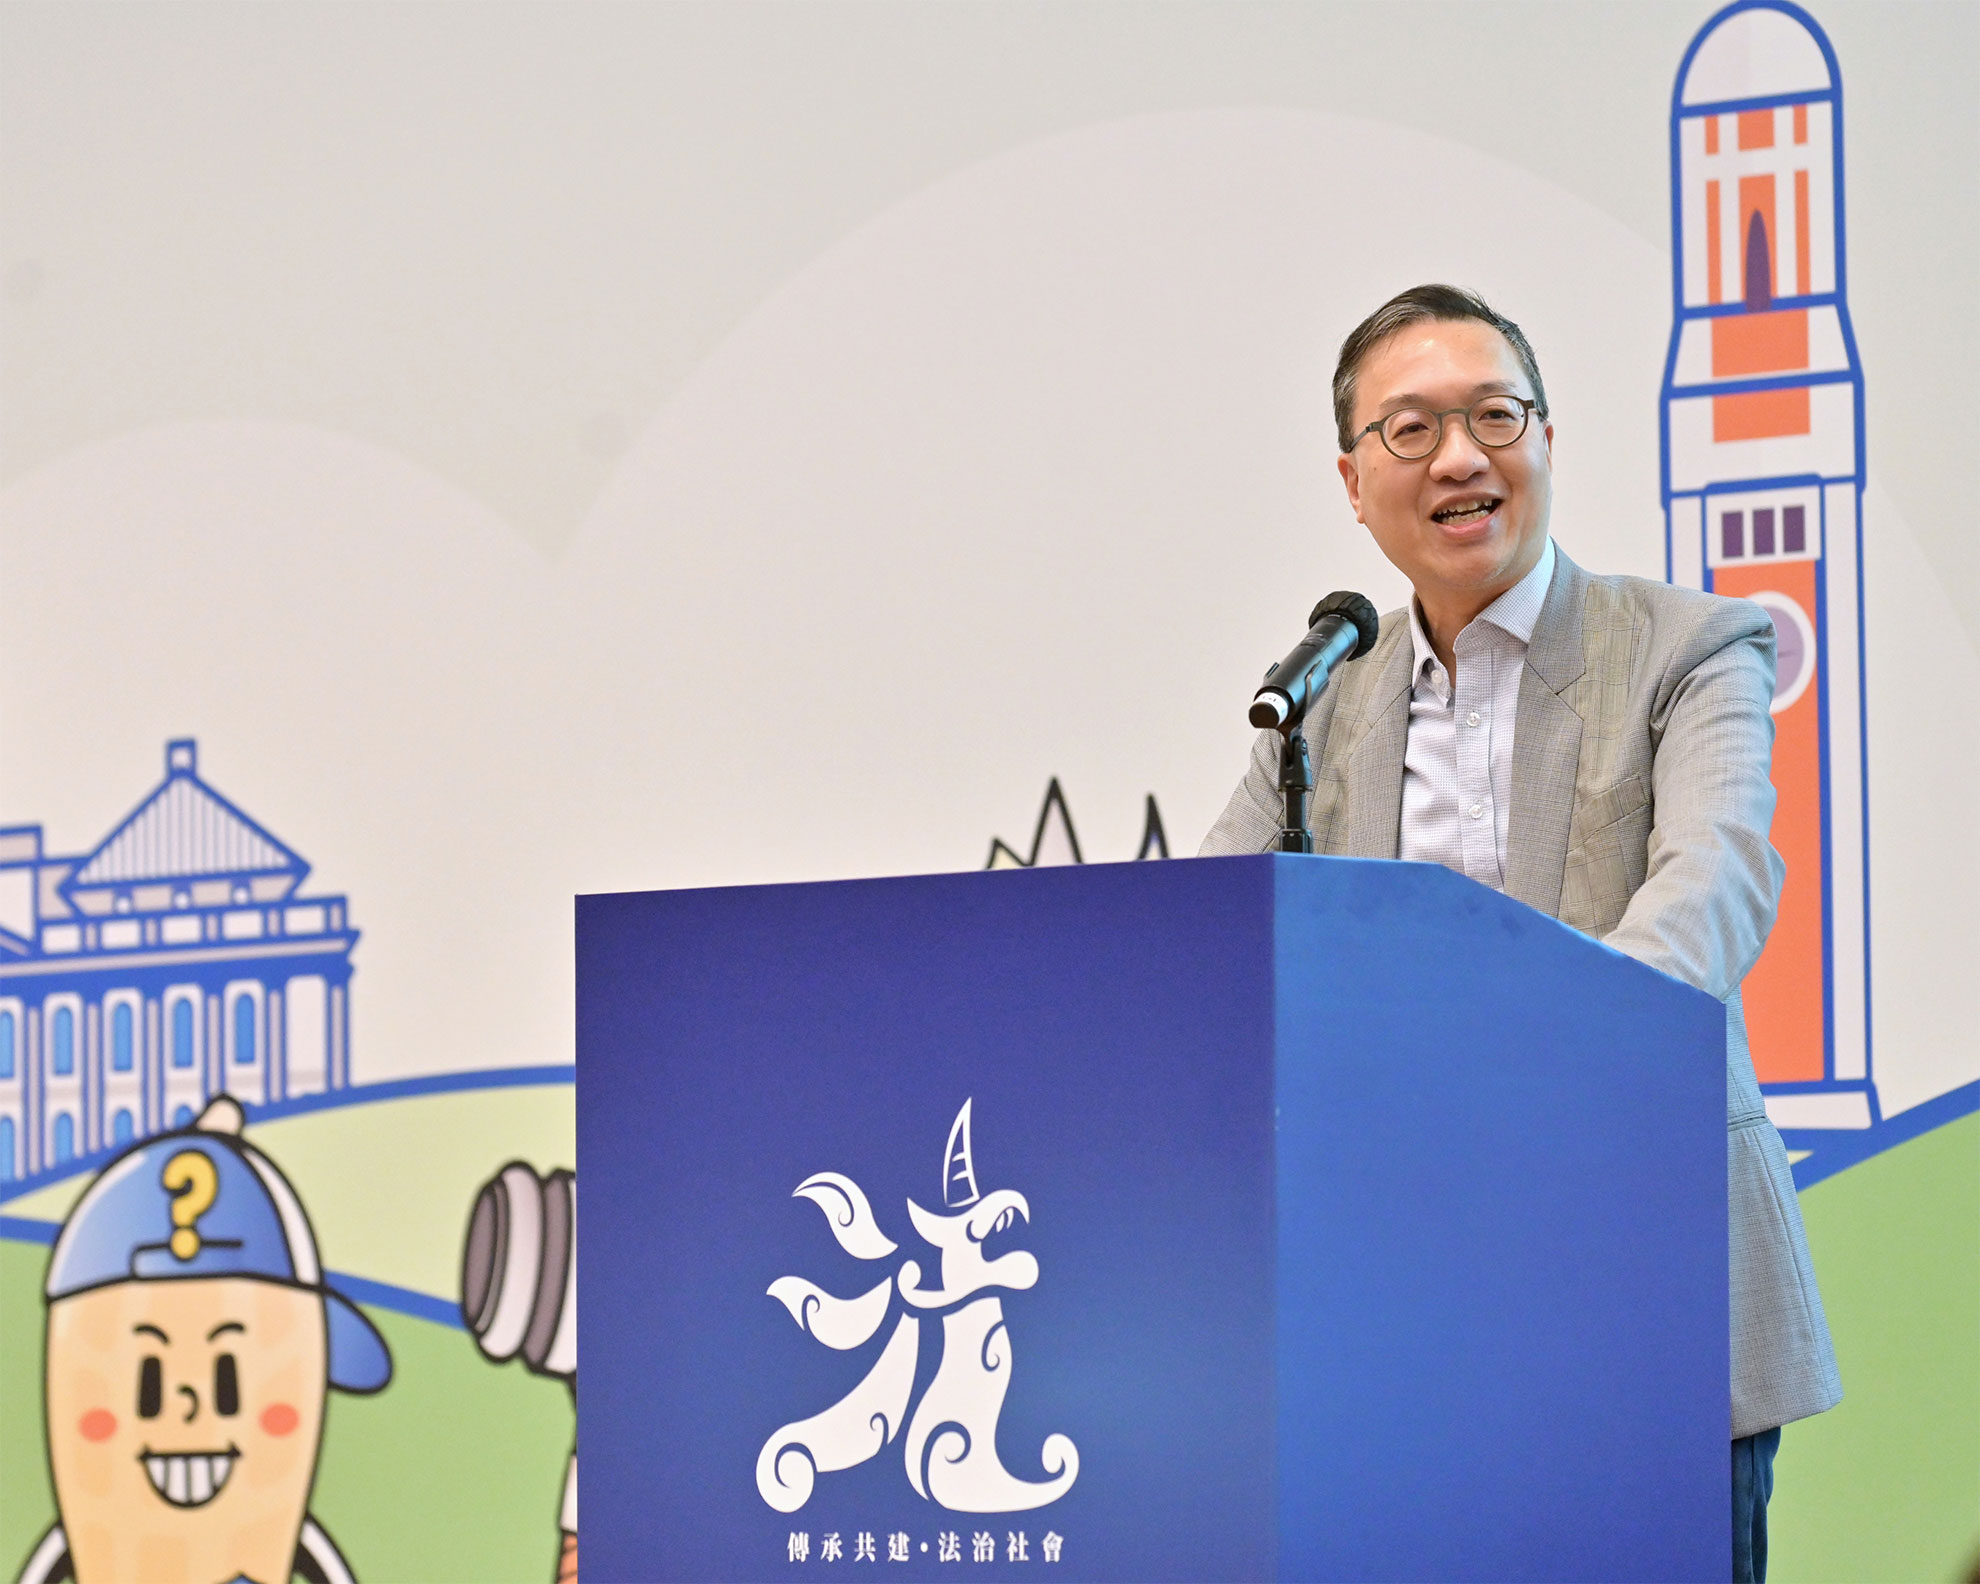 Themed "Rule of Law Education Stars", the first phase of the Rule of Law Education Train-the-Leaders Programme organised by the Department of Justice successfully concluded today (December 2). Photo shows the Secretary for Justice, Mr Paul Lam, SC, delivering his speech at the closing ceremony of the programme.